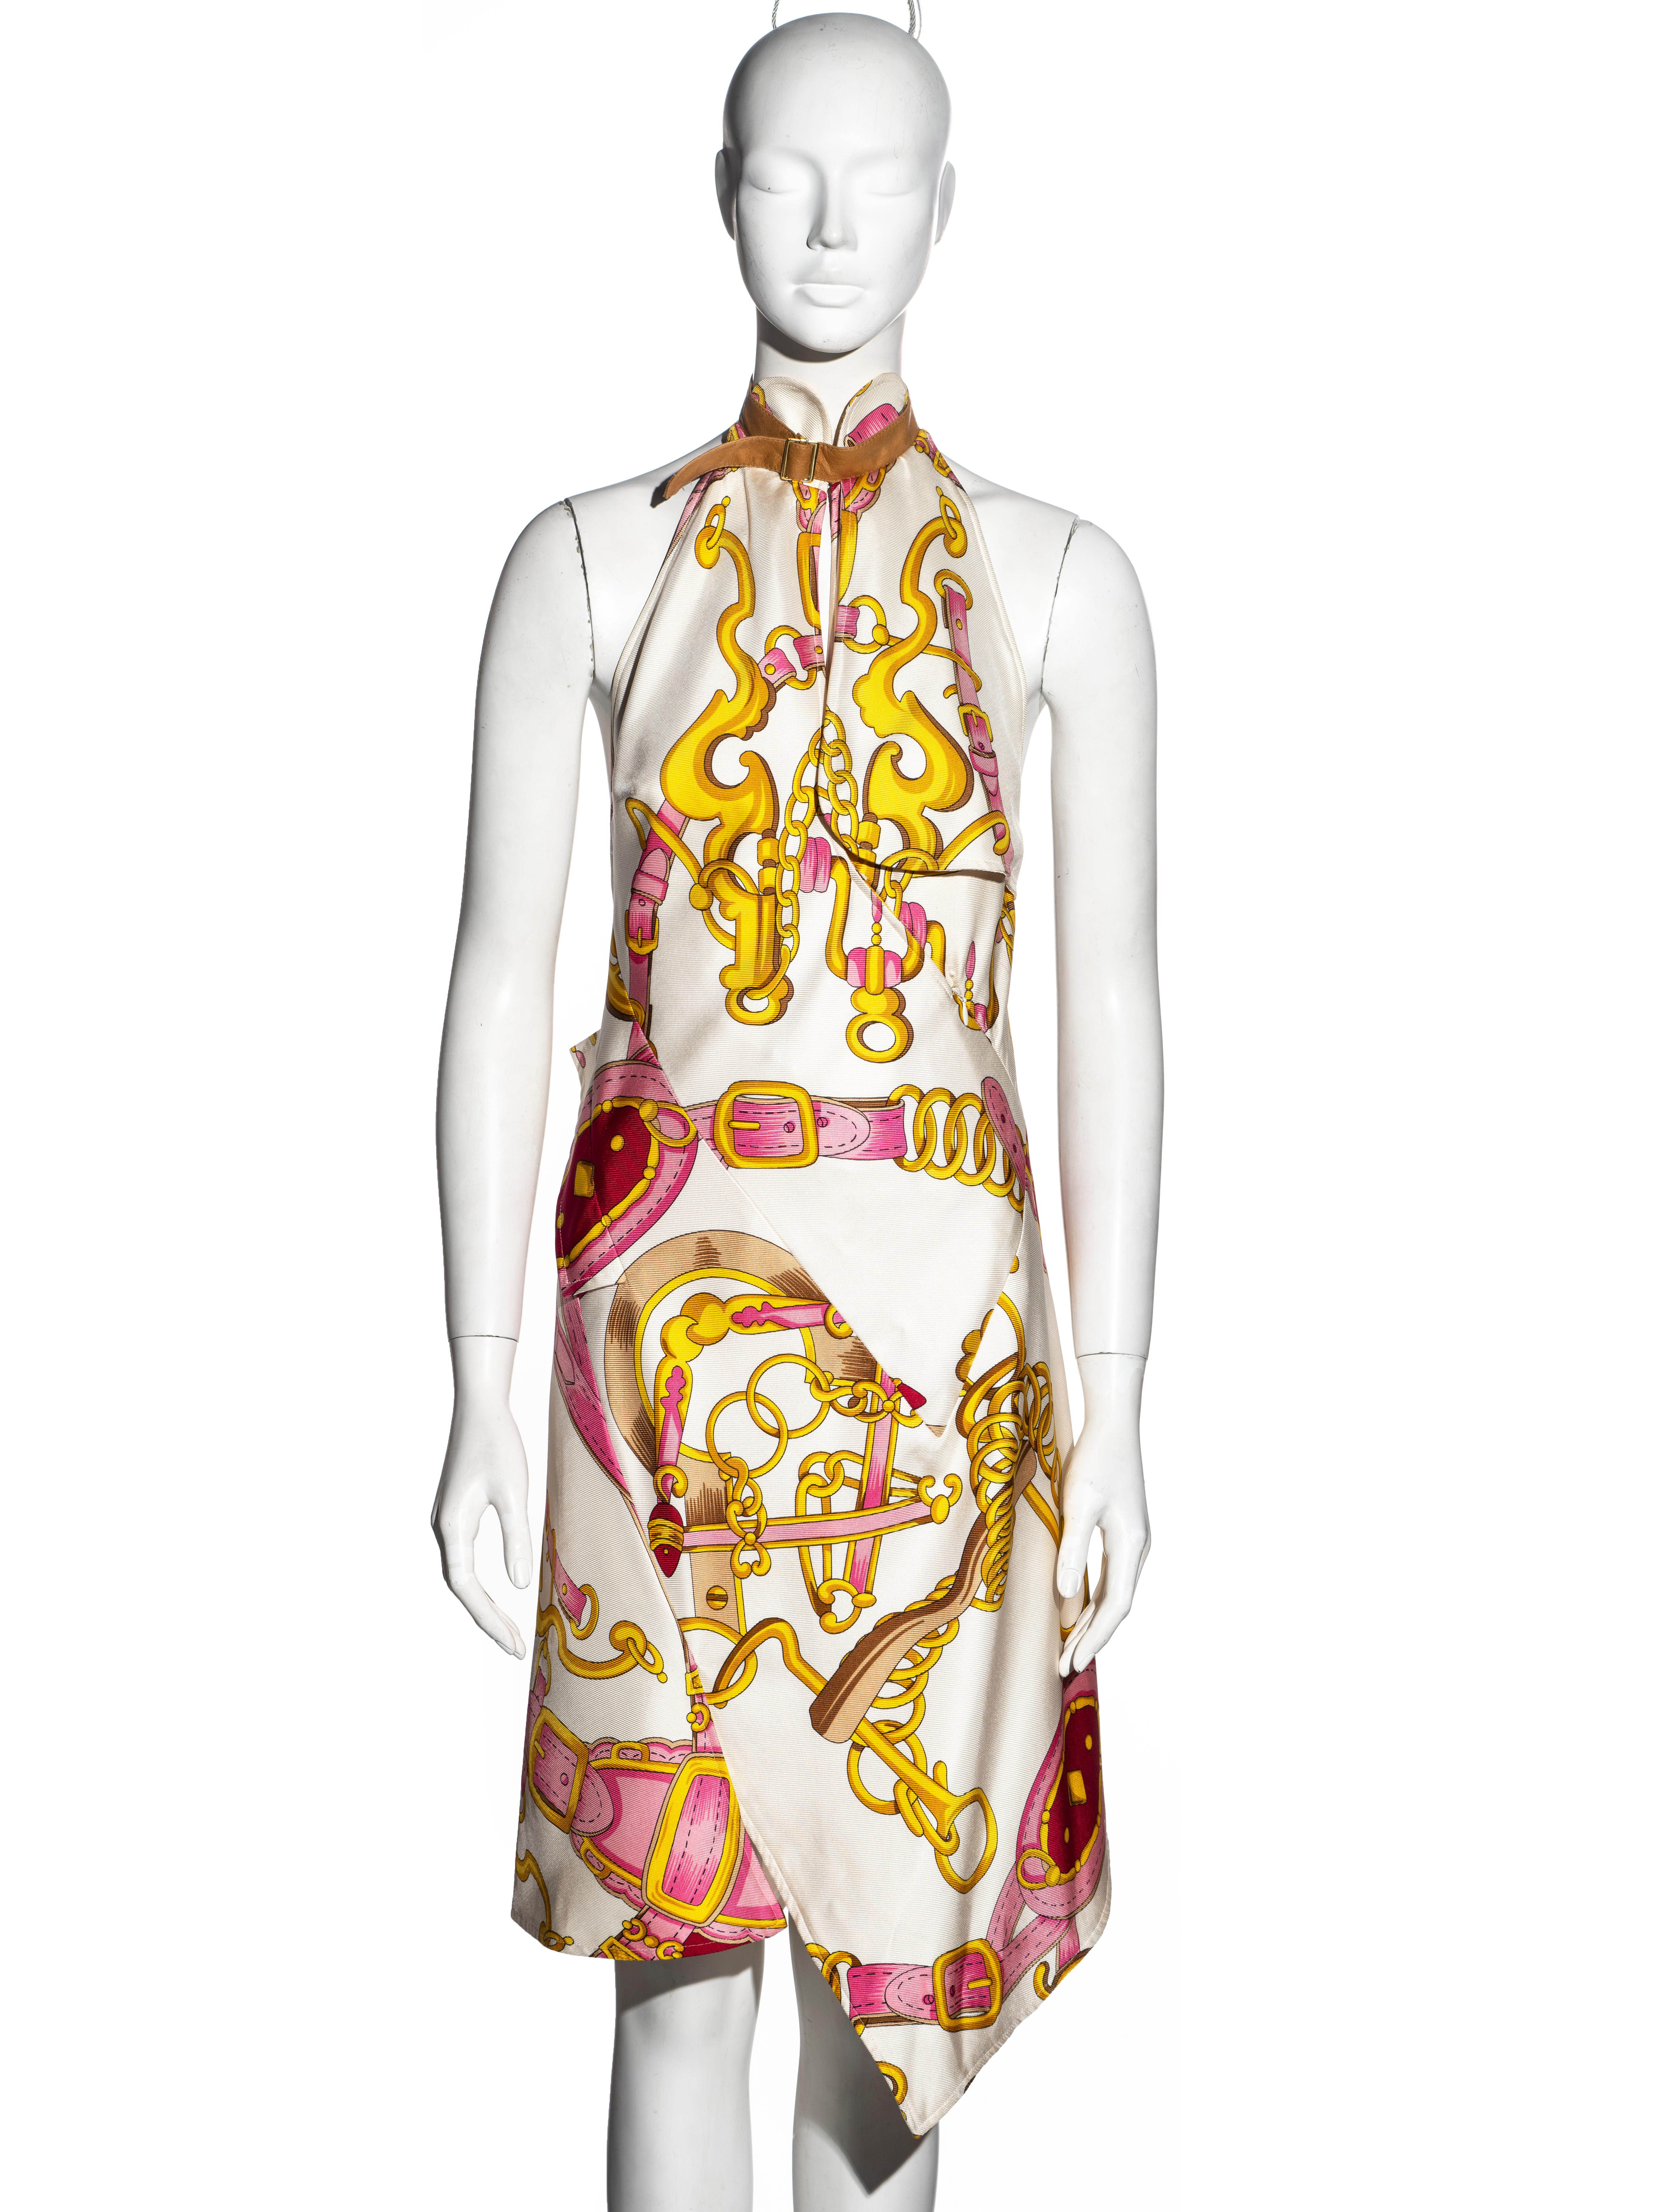 ▪ Important Christian Dior evening dress
▪ Designed by John Galliano
▪ Equestrian printed silk twill in pink and yellow with an ivory base
▪ Tan leather strap at the neck 
▪ Open back
▪ Bias-cut 
▪ Asymmetric hemline 
▪ Charmeuse silk lining
▪ FR 40